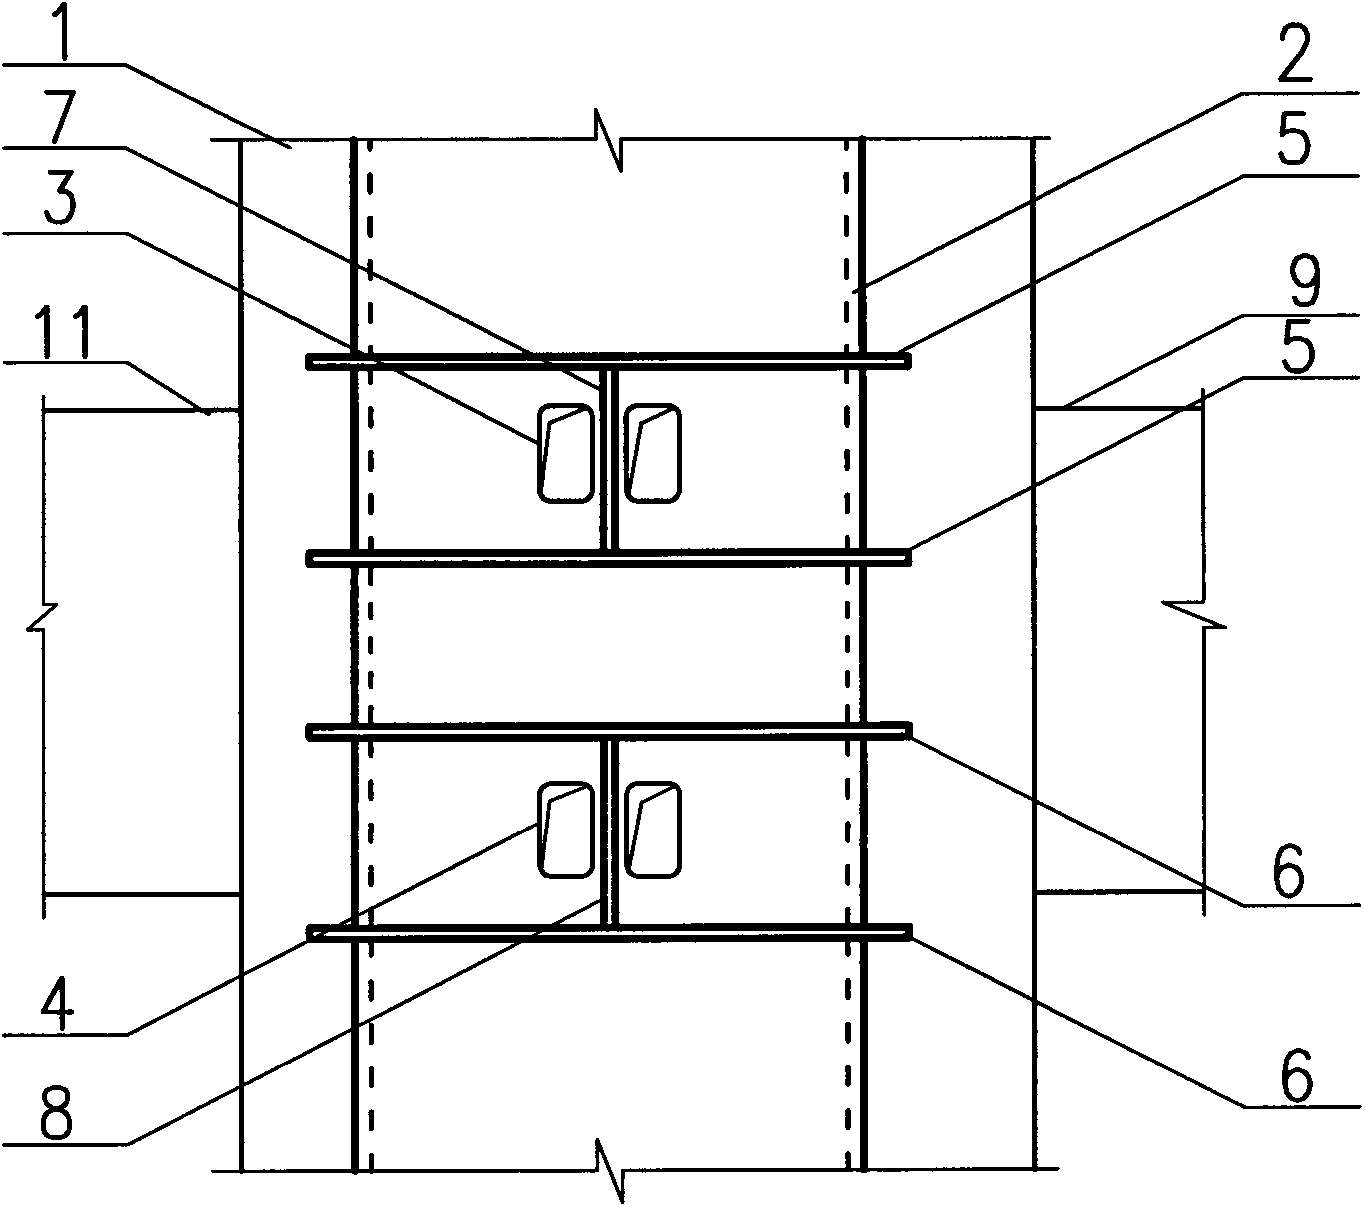 Connected node of concrete filled steel tube combination column and reinforced concrete beams